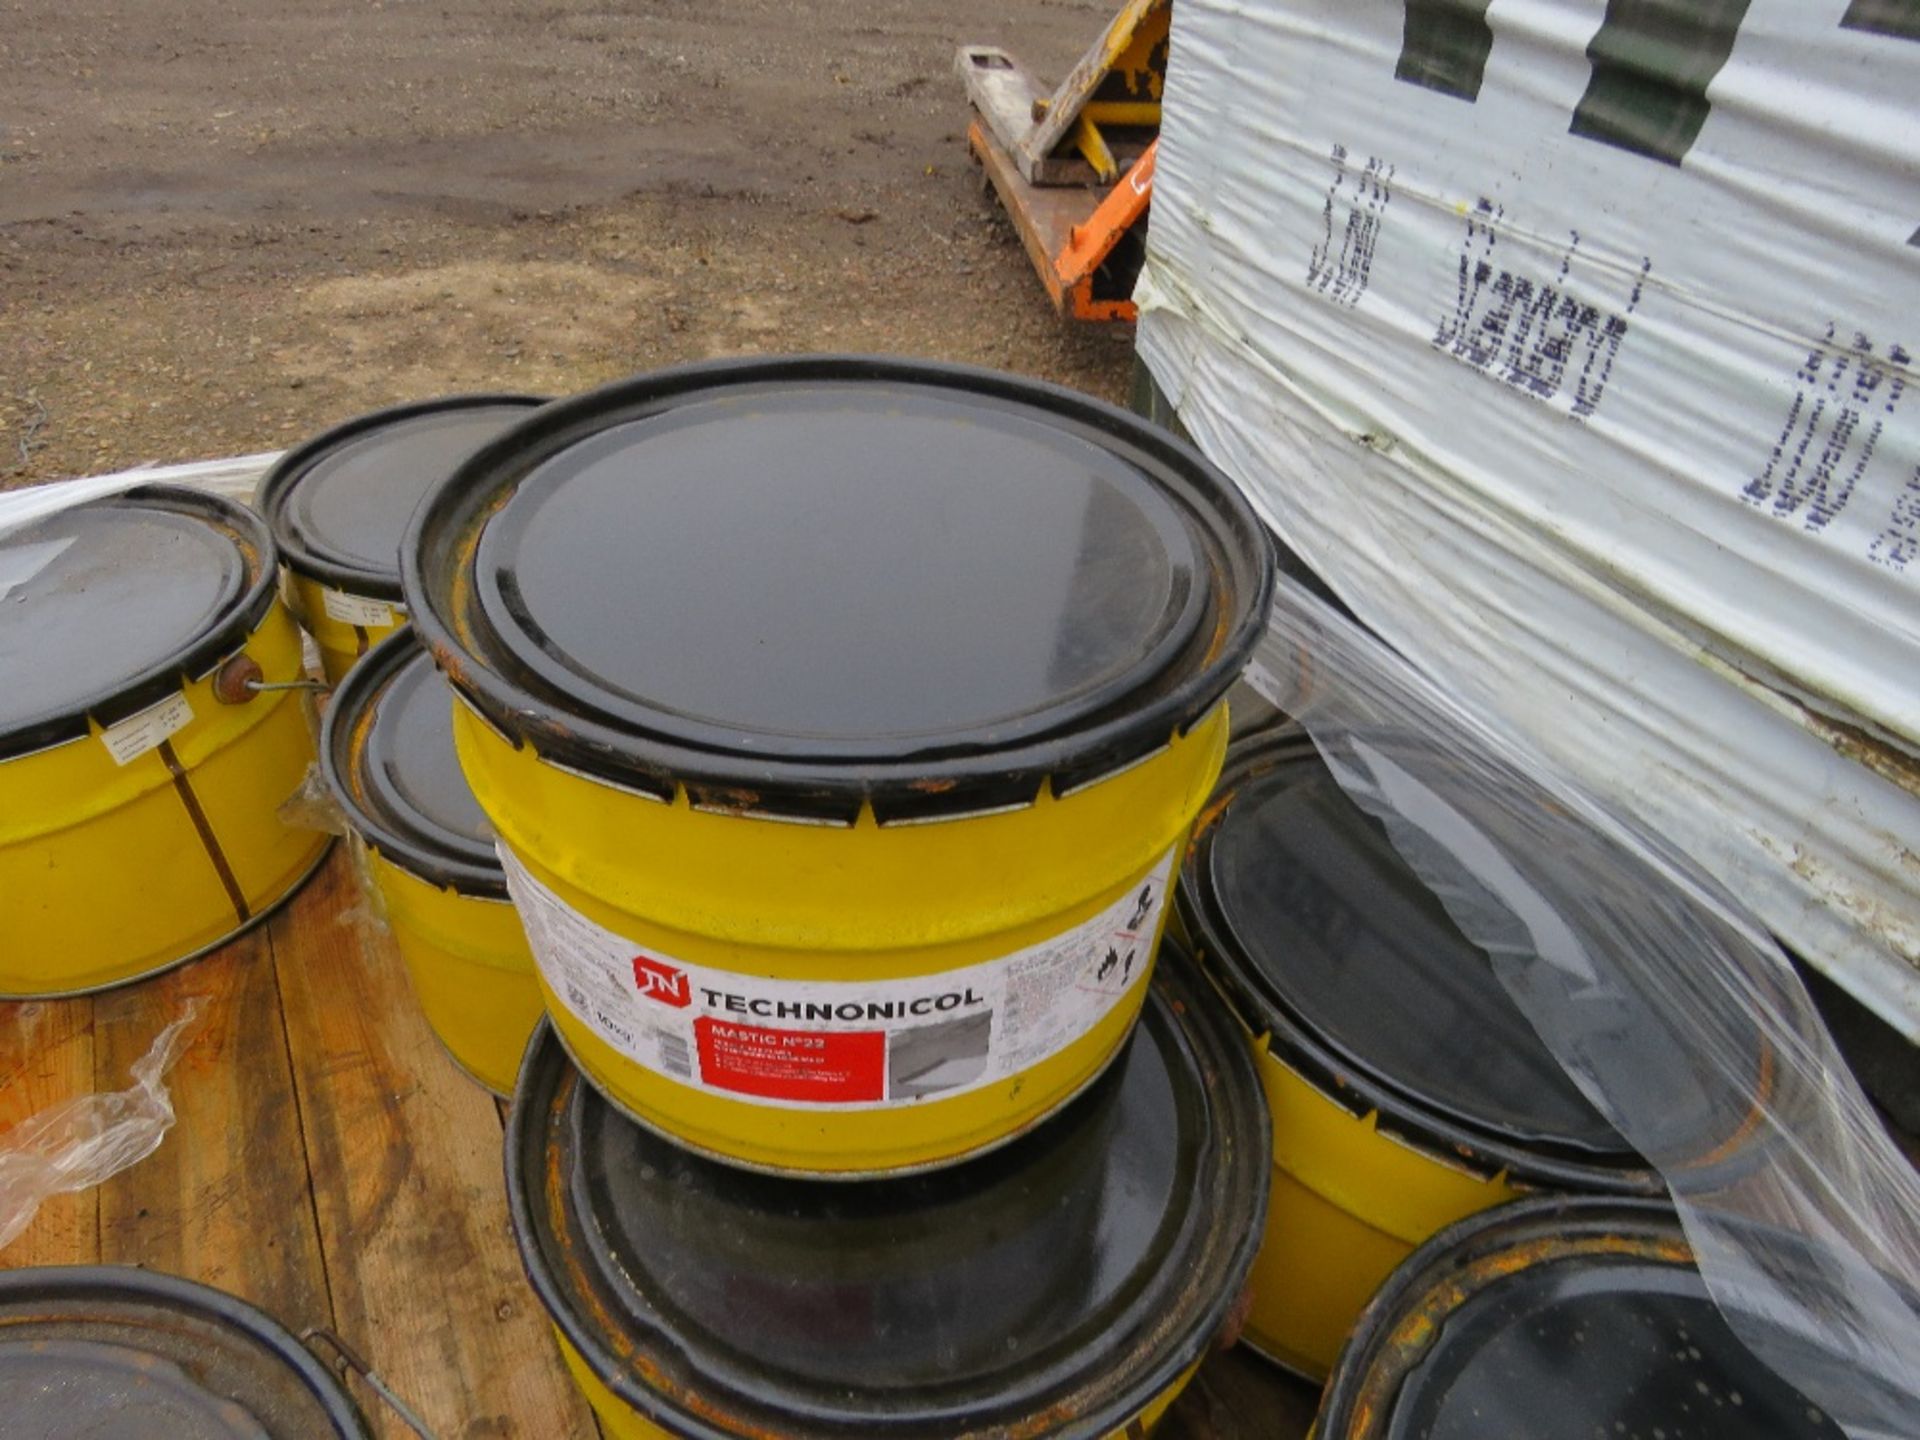 11NO TINS OF TECHNONICOL MASTIC 22 ROOFING COMPOUND. - Image 2 of 3